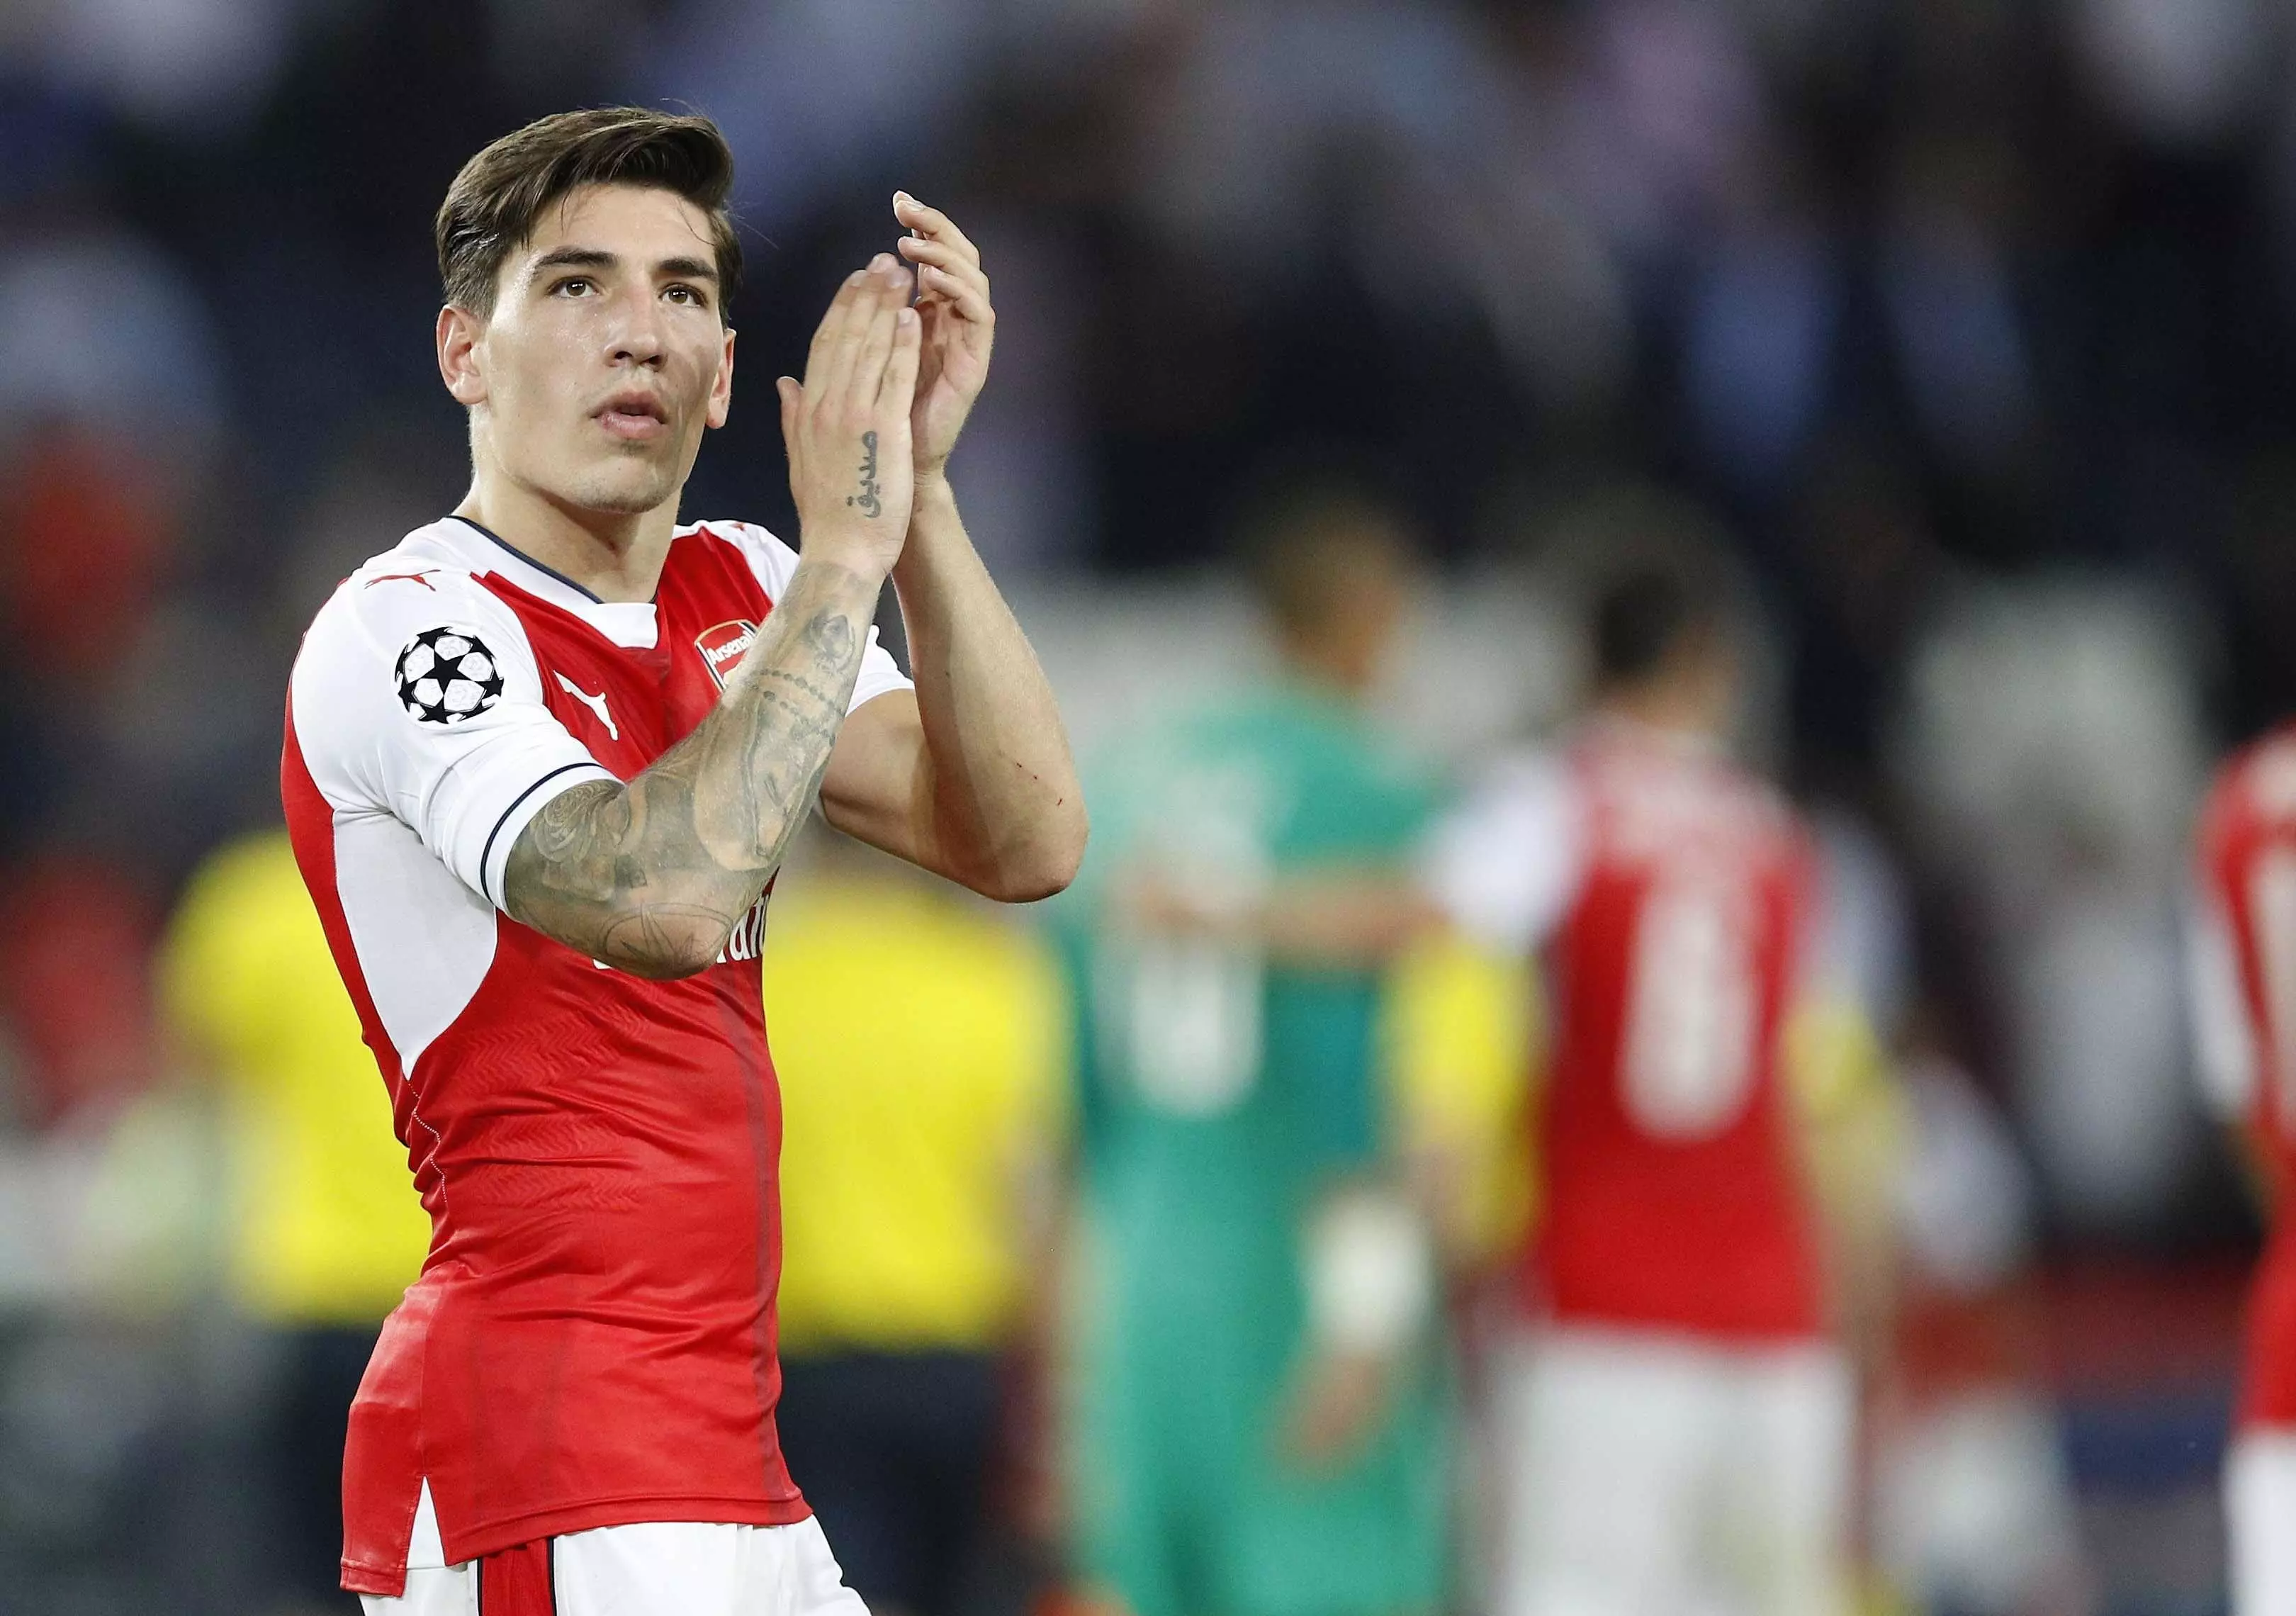 Could Bellerin move to Old Trafford? Image: PA Images